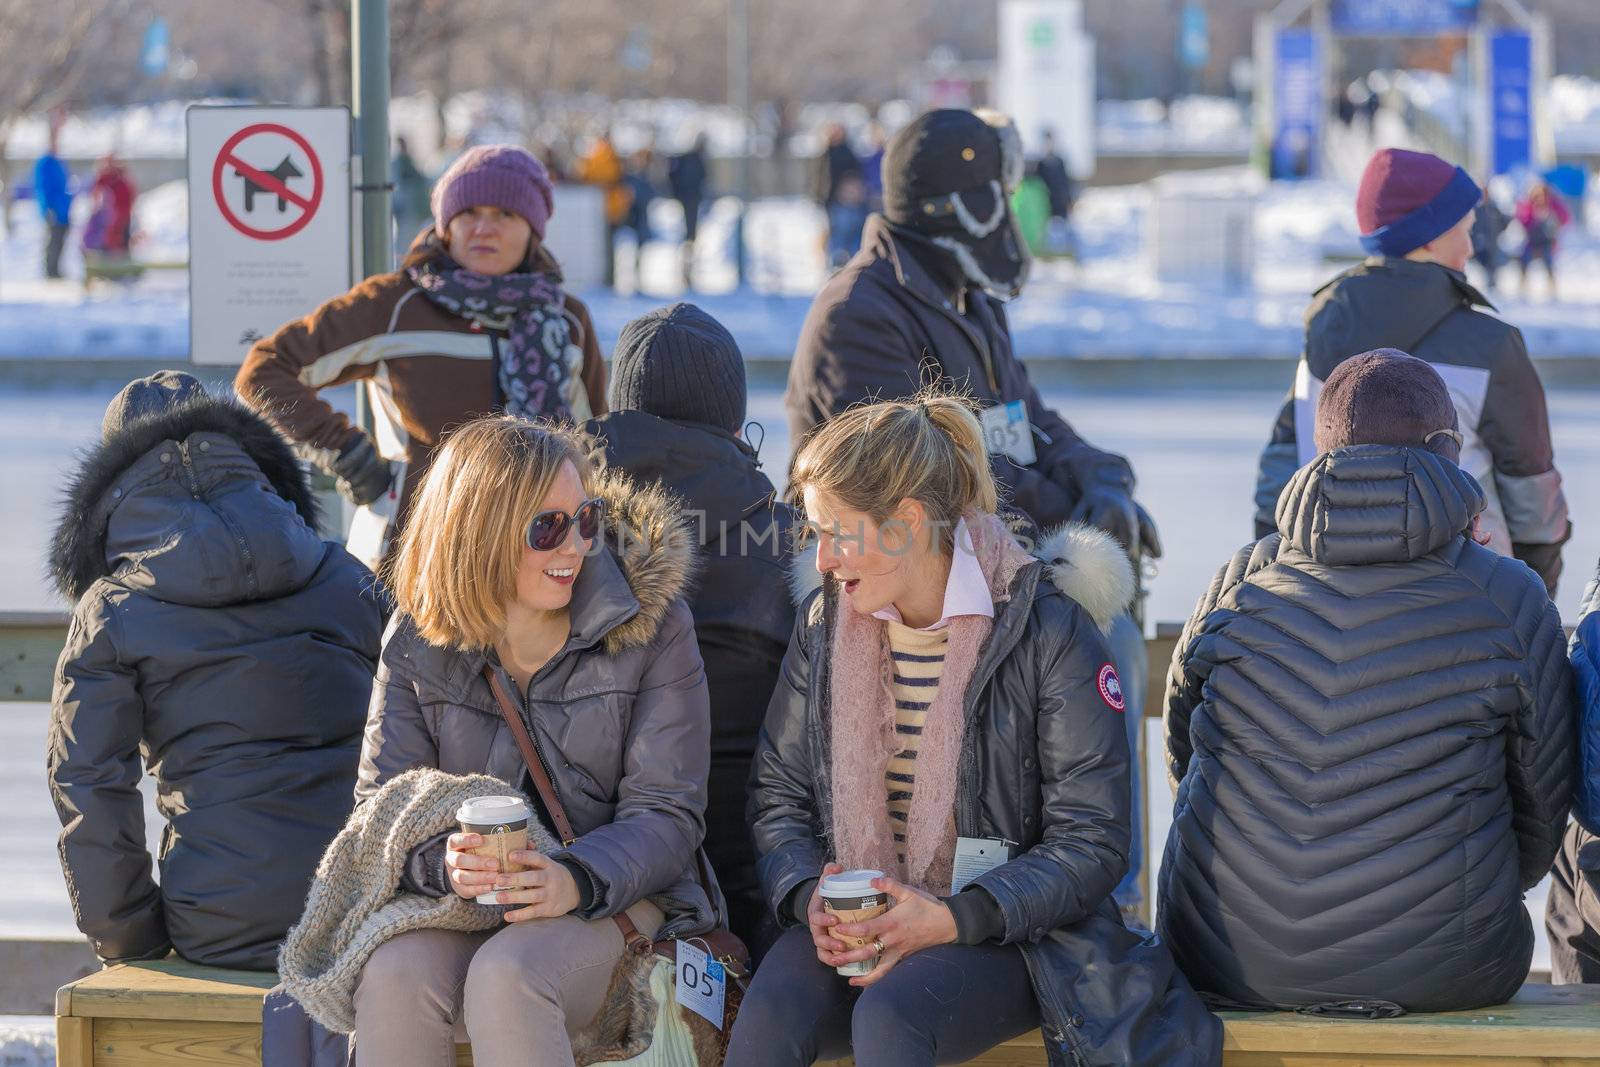  Two women are talking with other and are laughing, while waiting for the Skating Rink to open in the Old Port of Montreal, Quebec, Canada